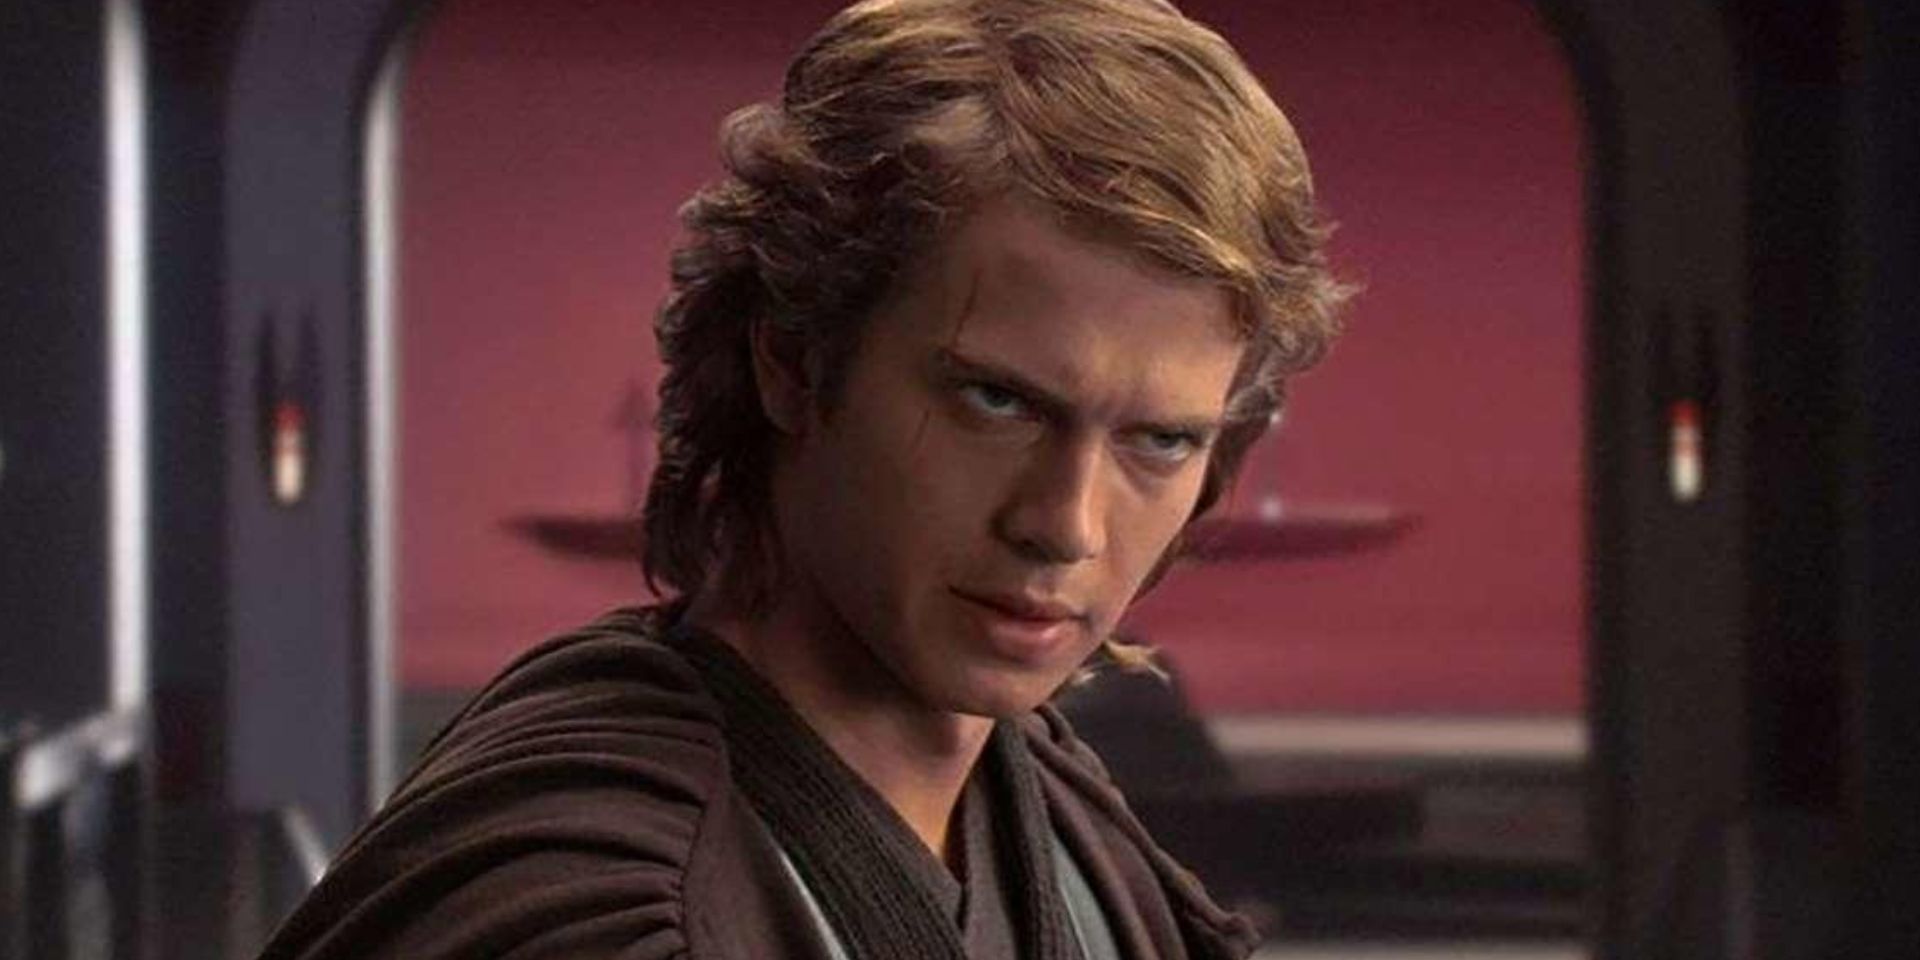 Anakin glaring in Palpatine's office in Revenge of the Sith